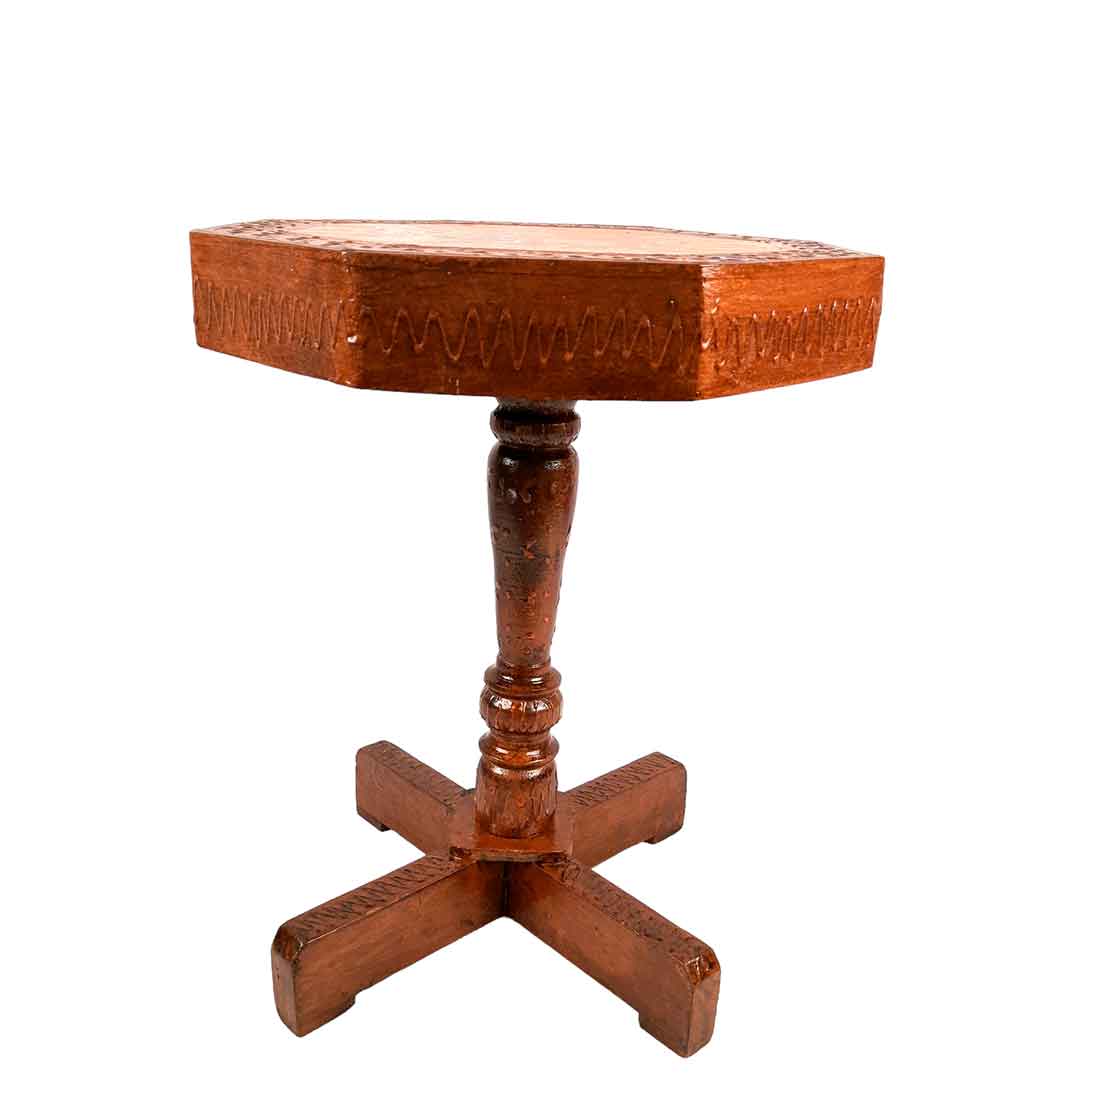 Wooden Side Table | End Table | Wood Stool - for Home Decor, Corners, Sofa Side & Gifts - 15 Inch - apkamart